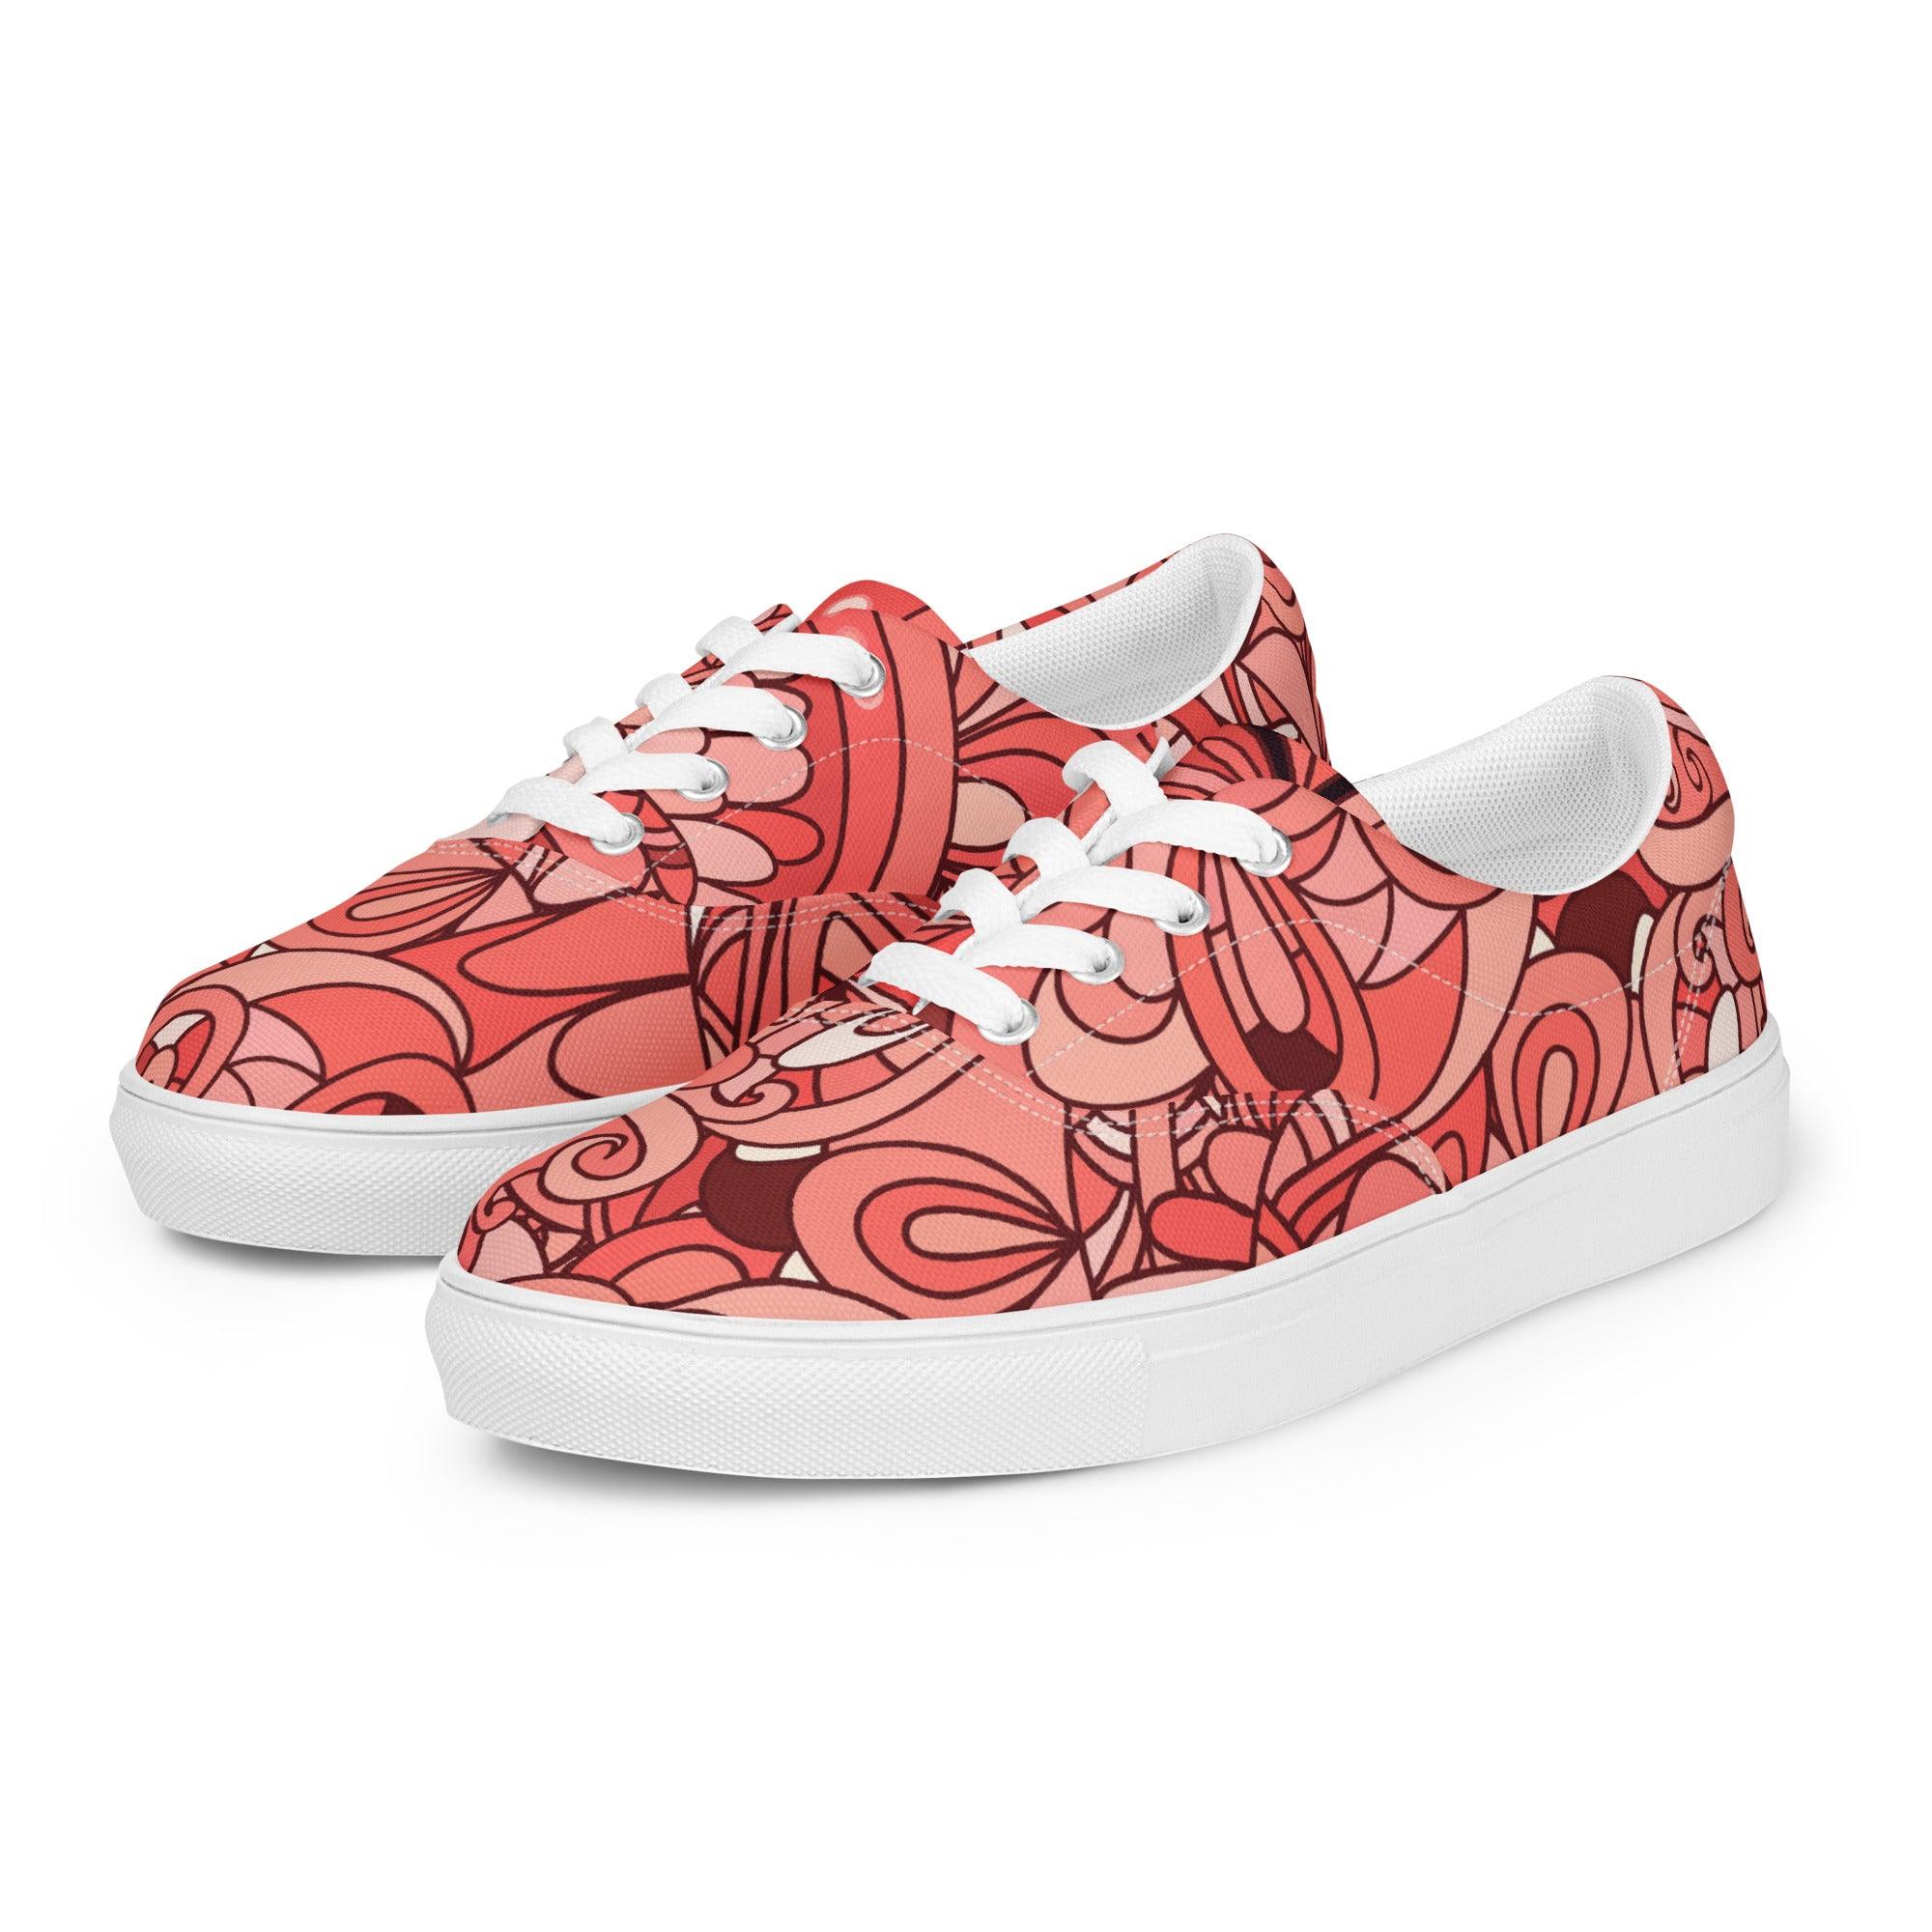 Citra Lace Up Canvas Women's Sneaker - Abstract Floral Retro Print - Red | Pink